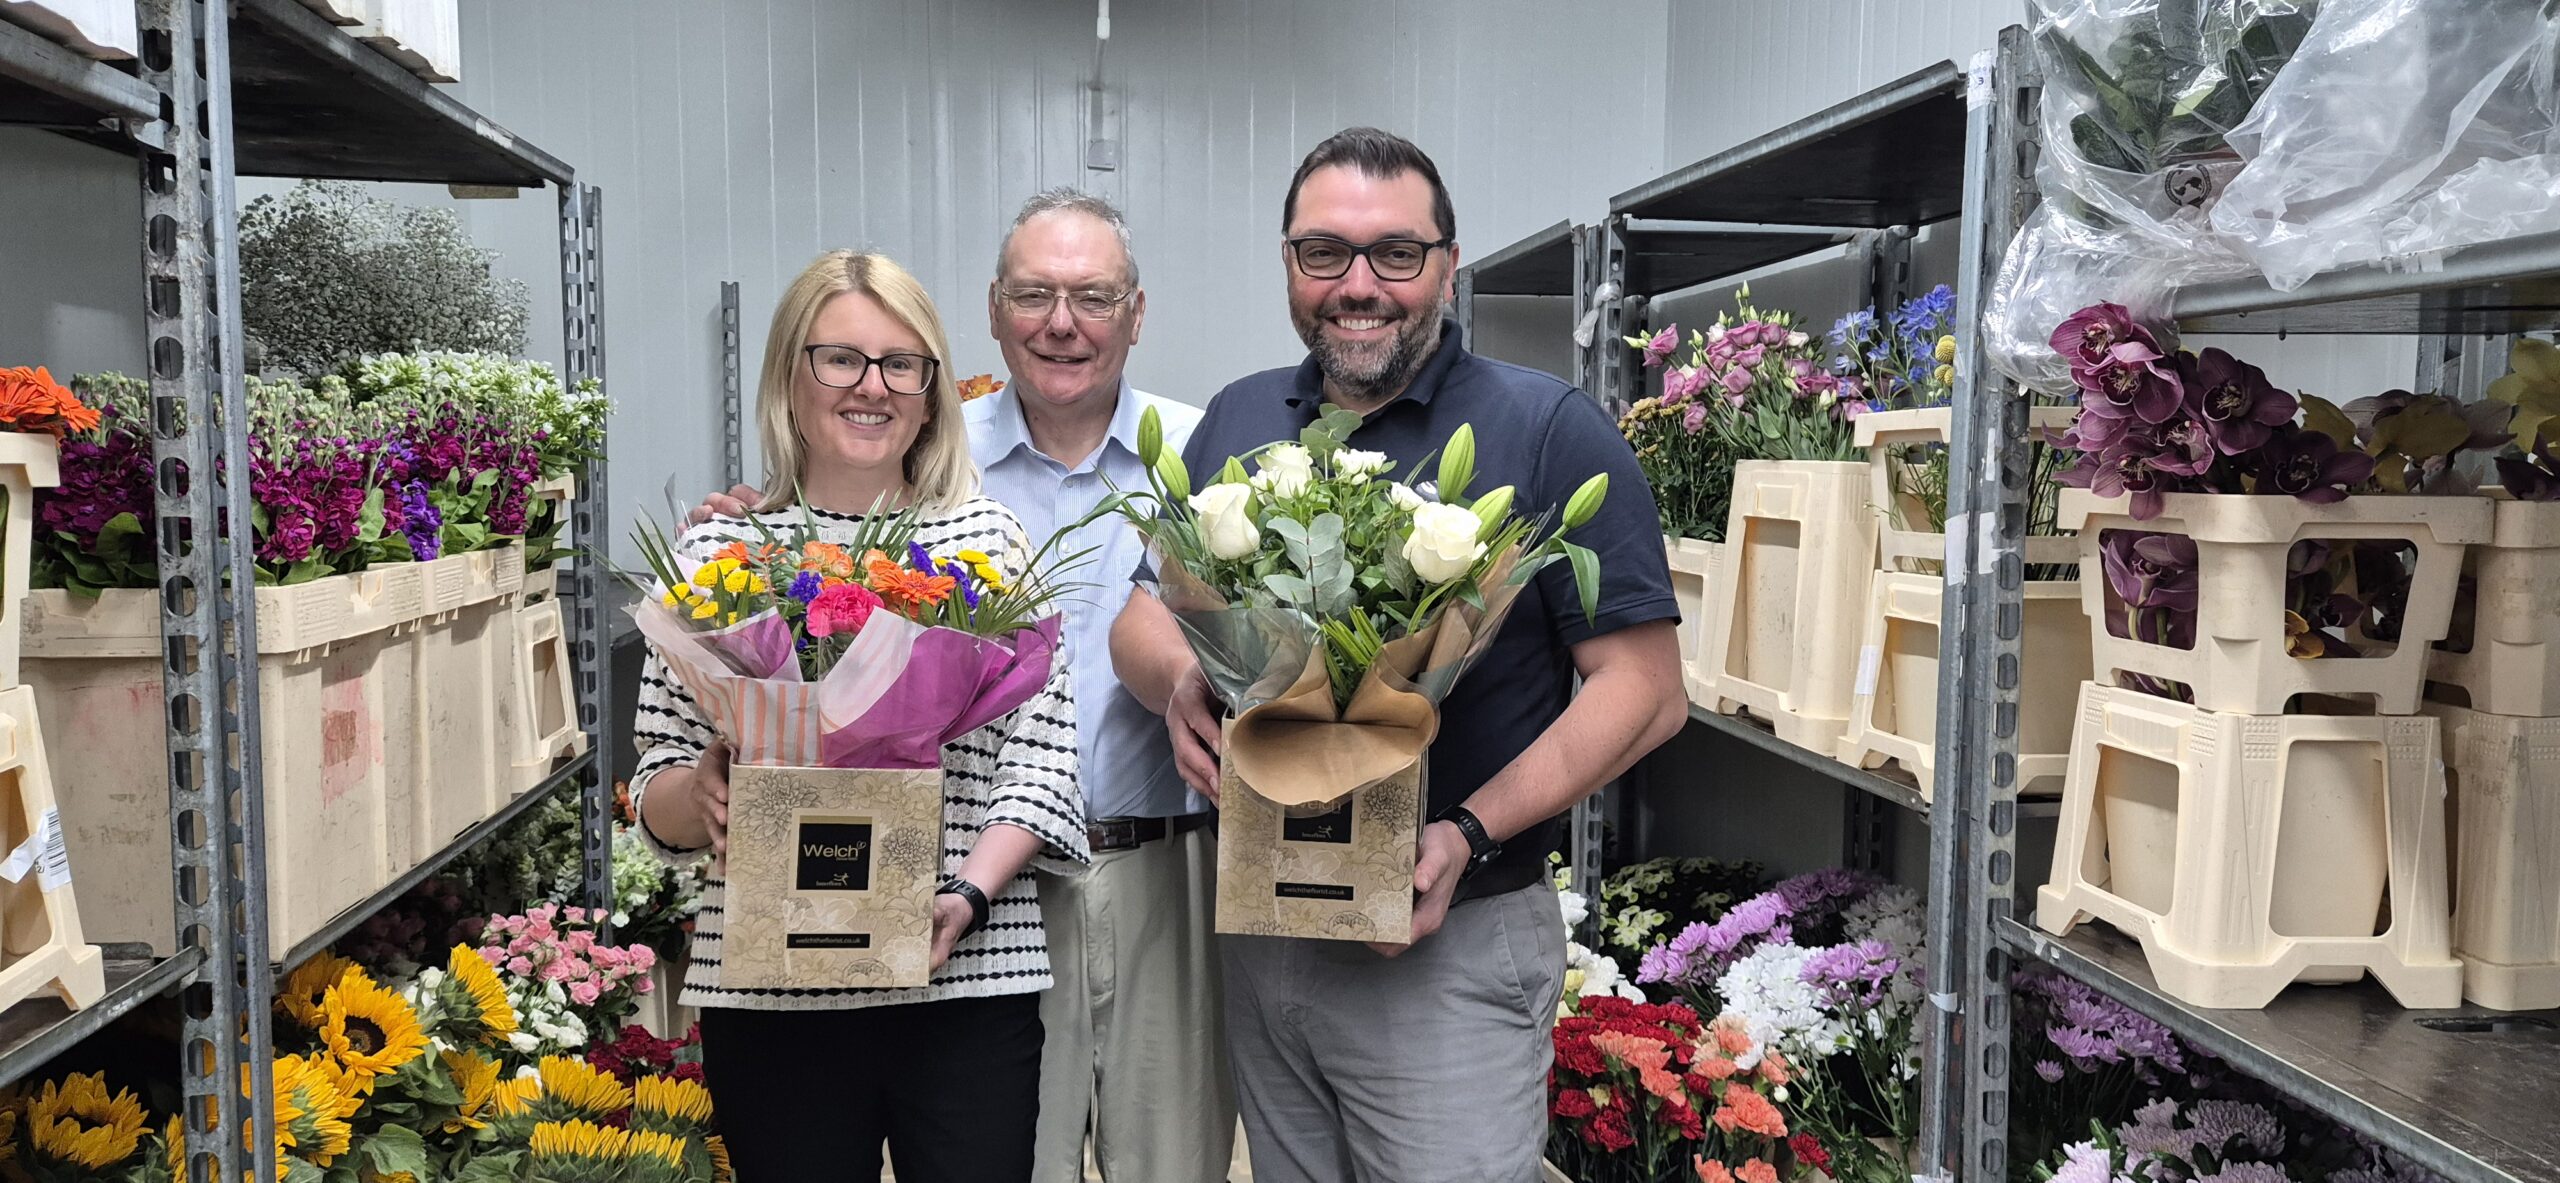 Nottingham’s Welch the Florist is recognised as a finalist in the Midlands Family Business Awards